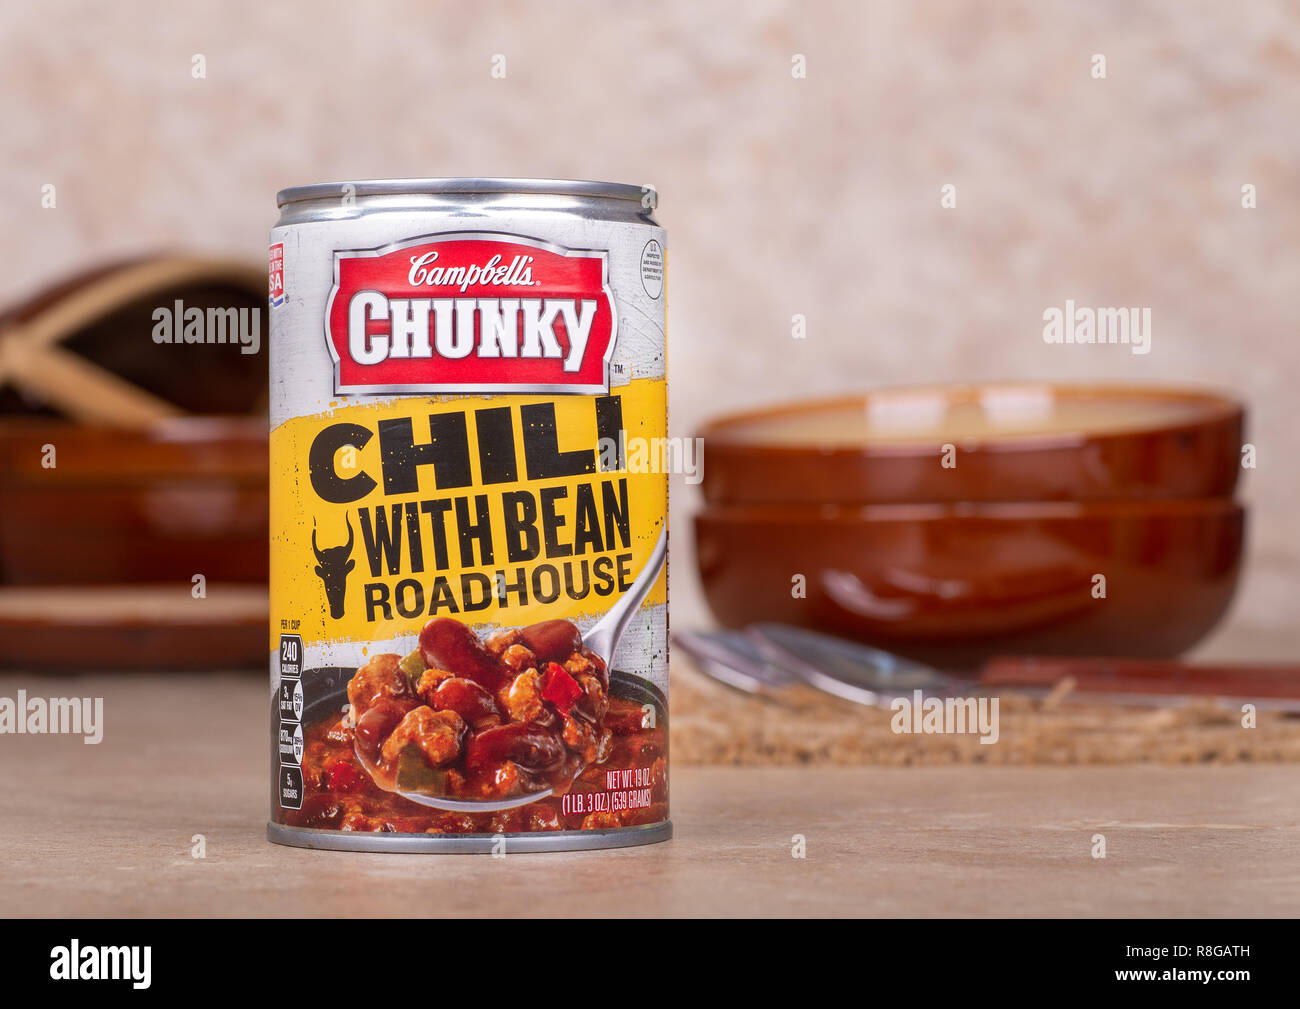 DECEMBER 13, 2018: Closeup of a can of Campbells Chunky Chili With Bean Roadhouse soup on a kitchen counter Stock Photo